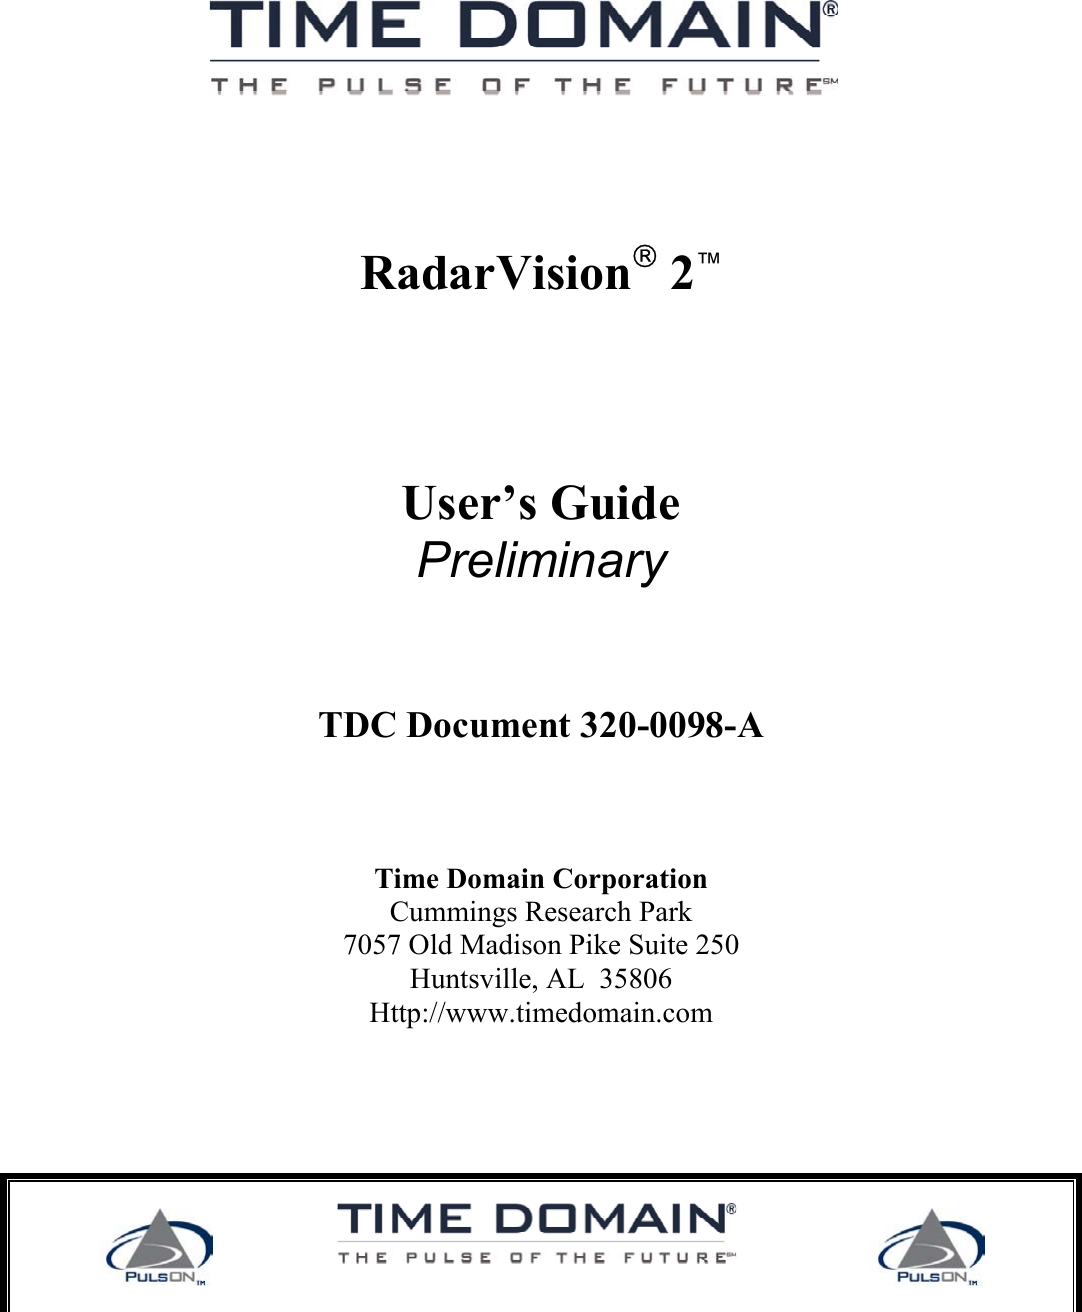      RadarVision 2™    User’s Guide Preliminary   TDC Document 320-0098-A     Time Domain Corporation Cummings Research Park 7057 Old Madison Pike Suite 250 Huntsville, AL  35806 Http://www.timedomain.com          